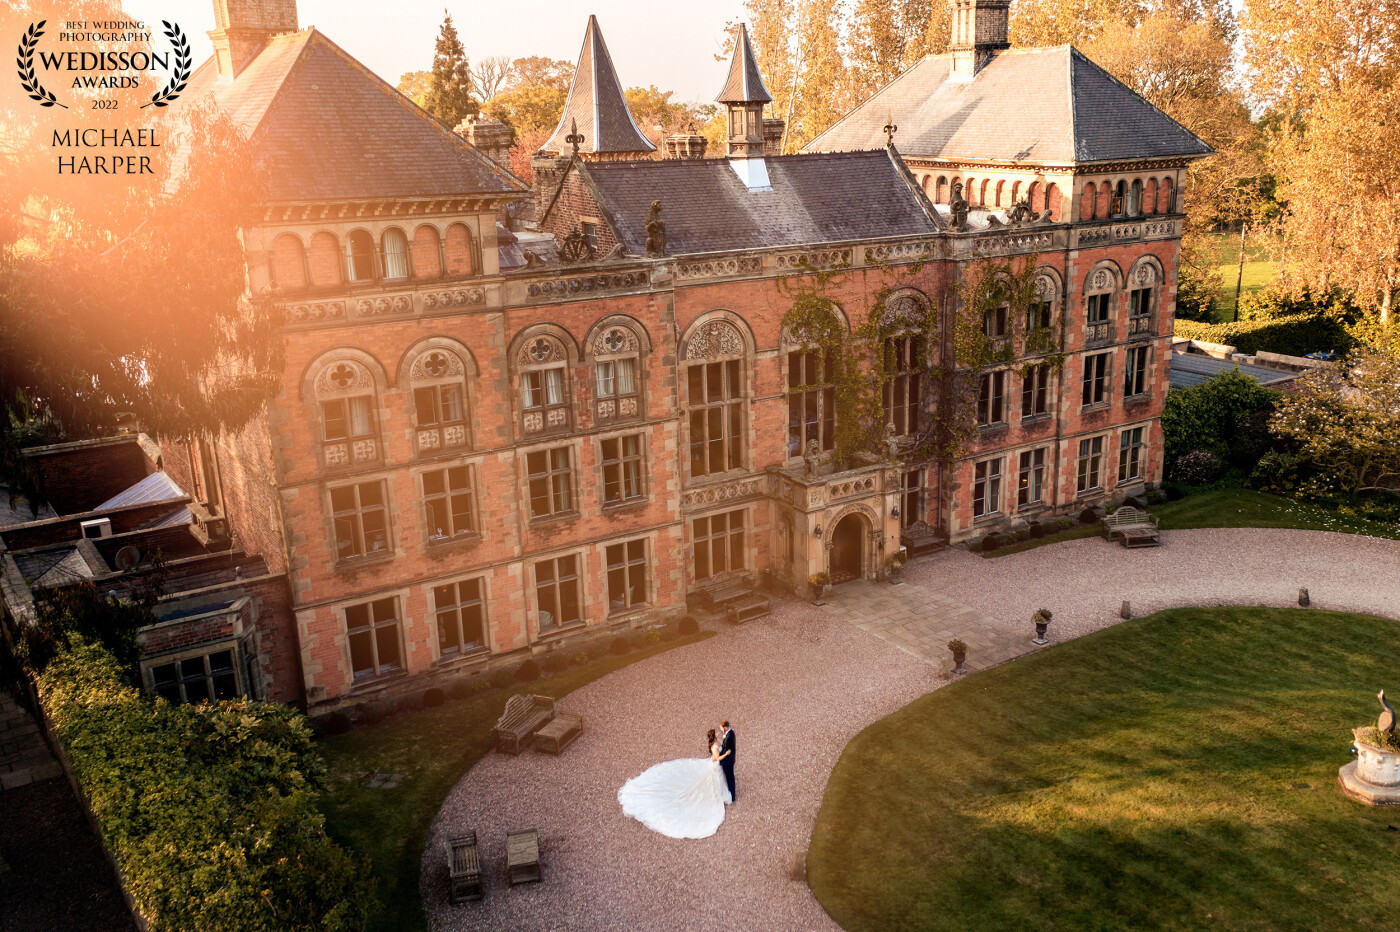 With the bride having such a big fairytale dress and the venue being a character in itself we wanted to bring these two elements together. We waited for the evening light to pass over the building to capture this amazing image by drone.